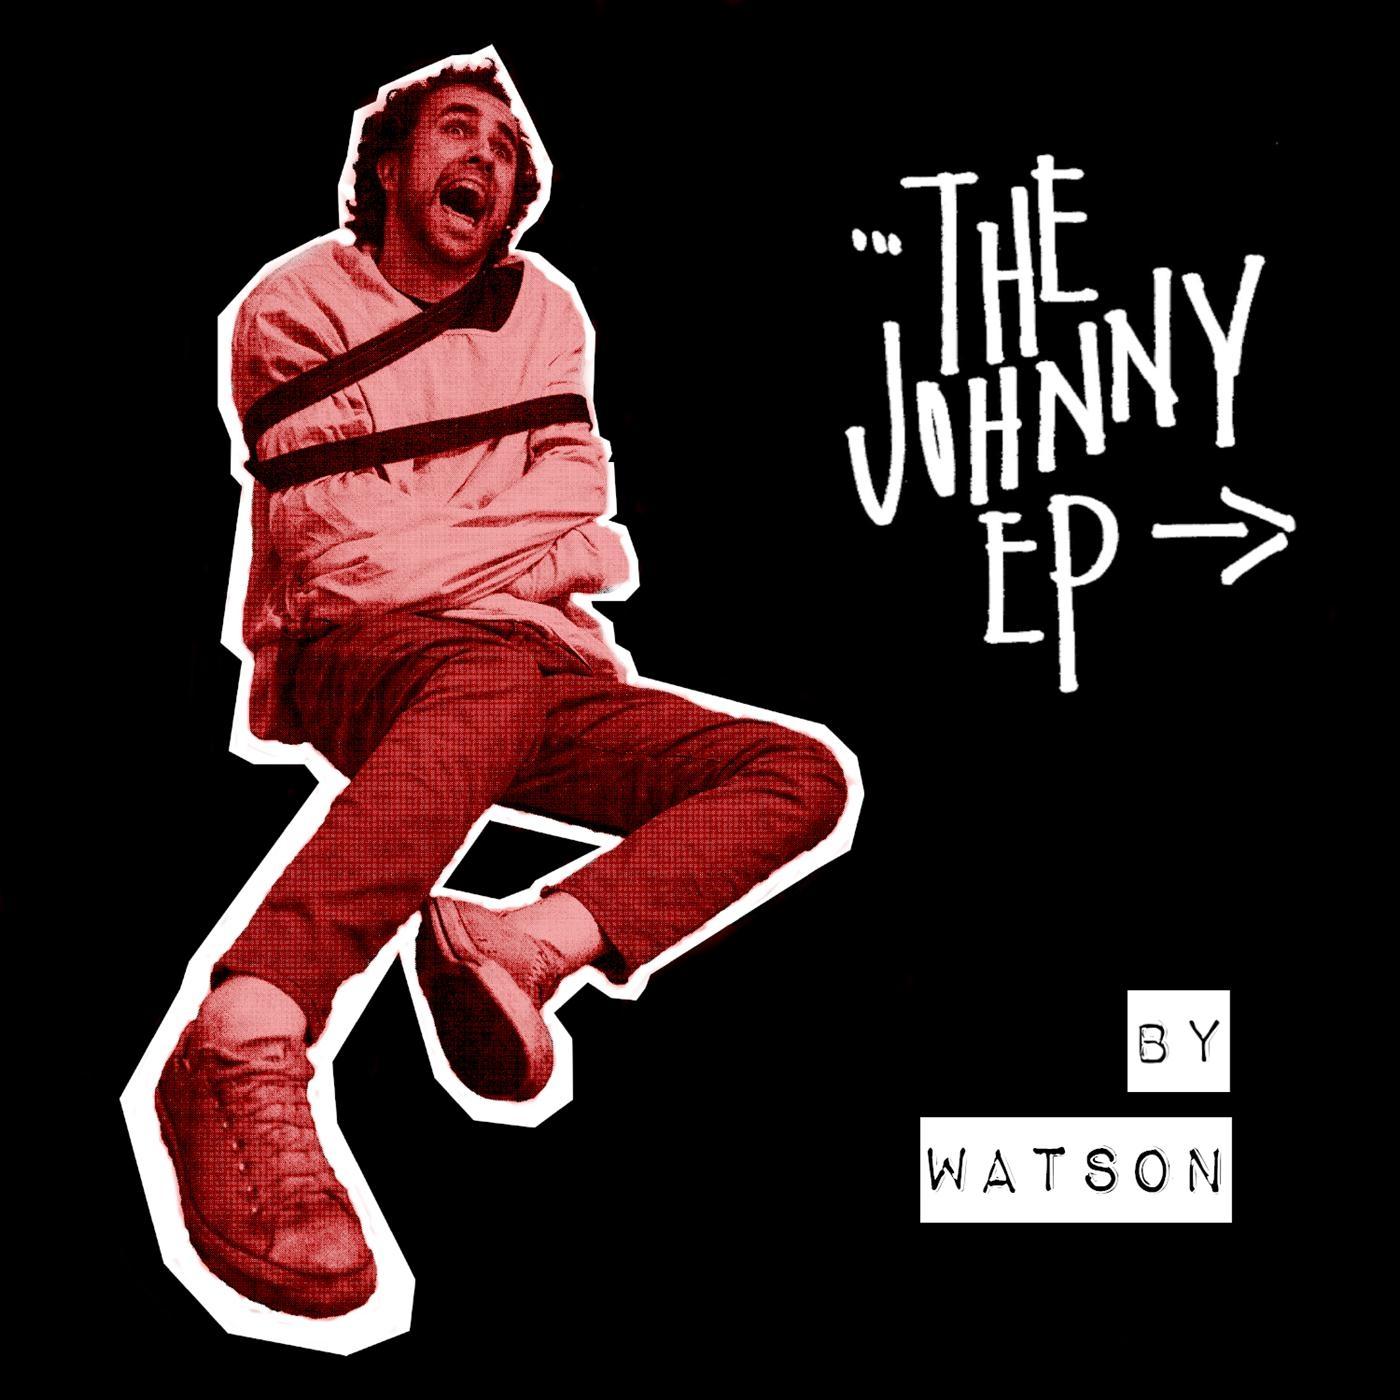 The Johnny EP